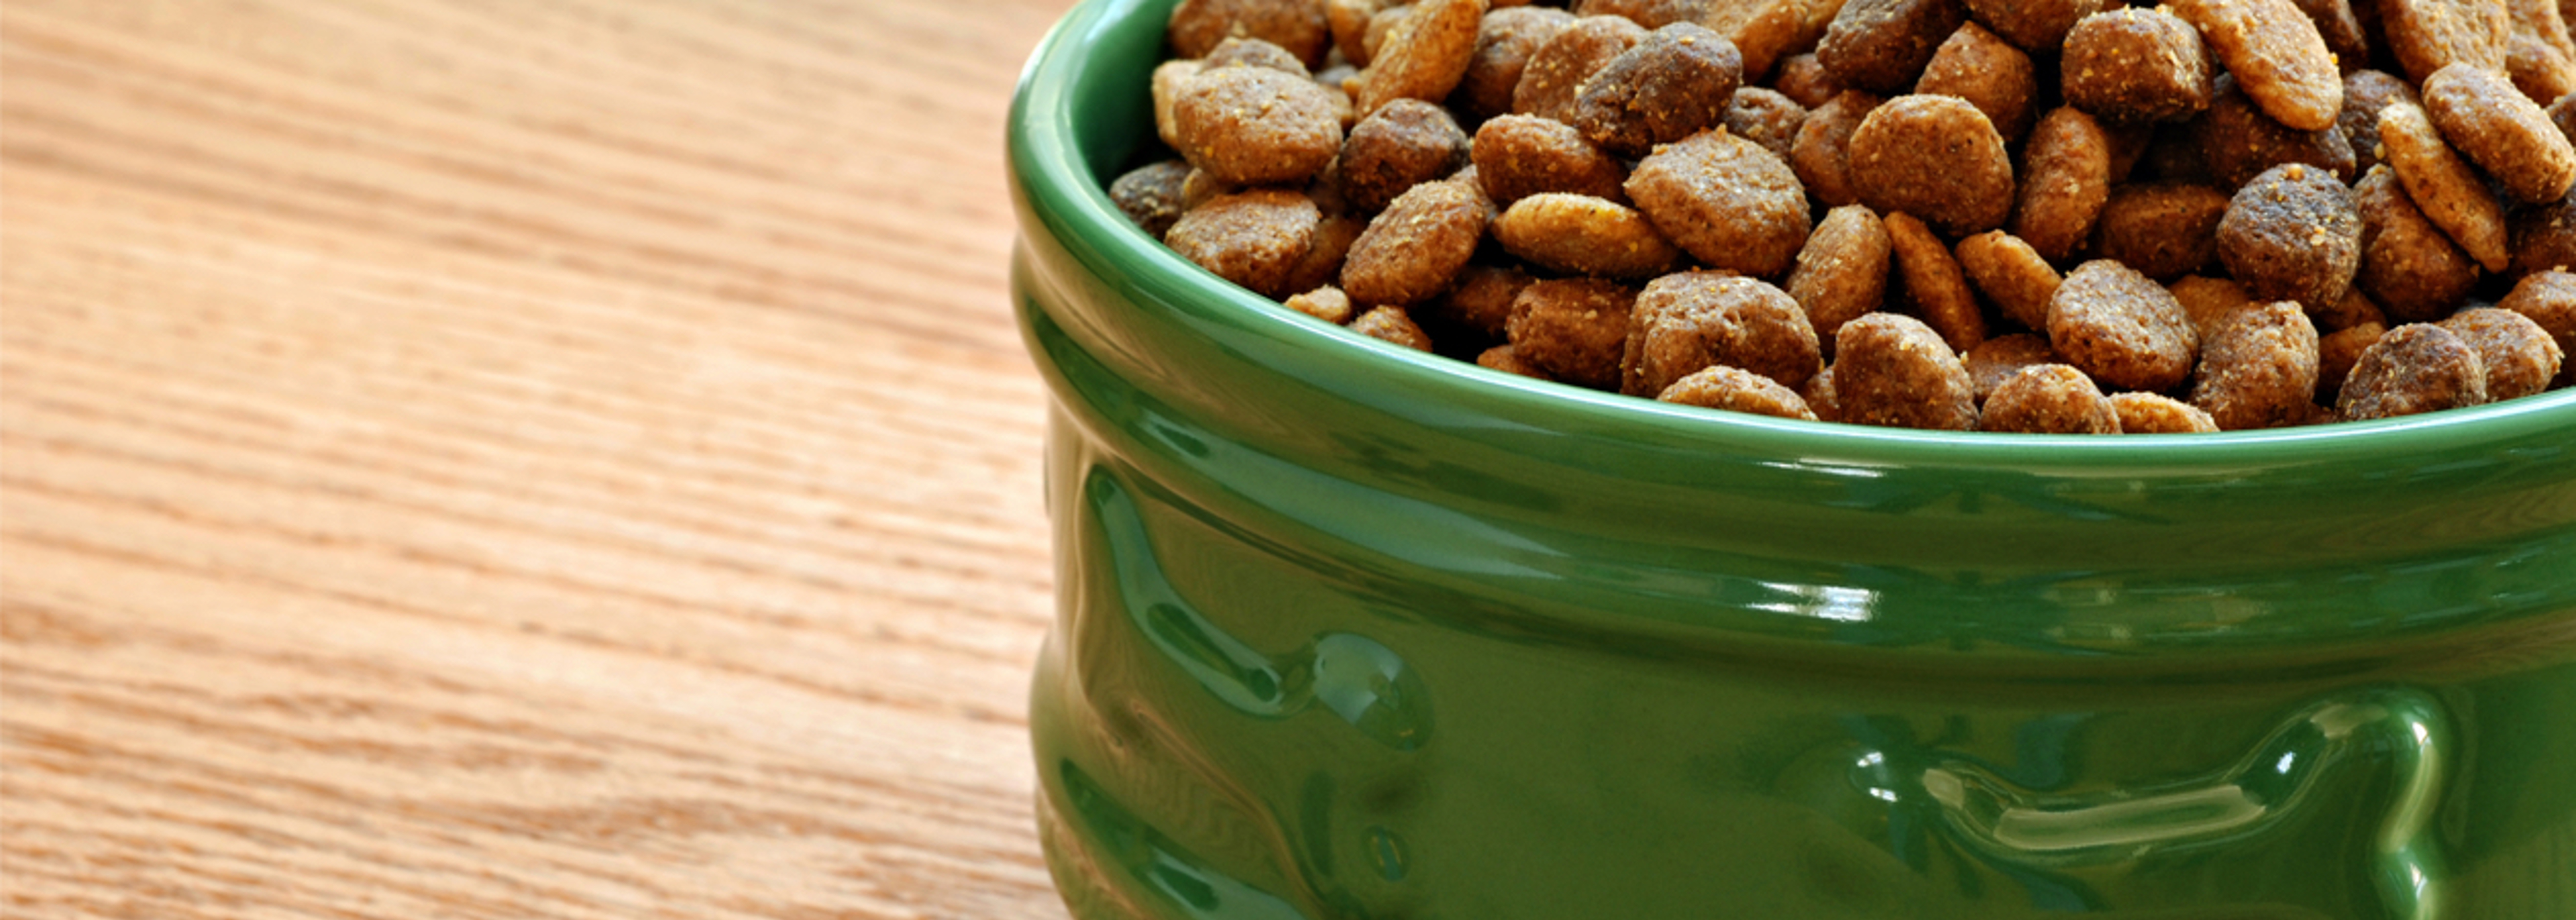 Food fraud concerns over moves to co-locate pet food and food production